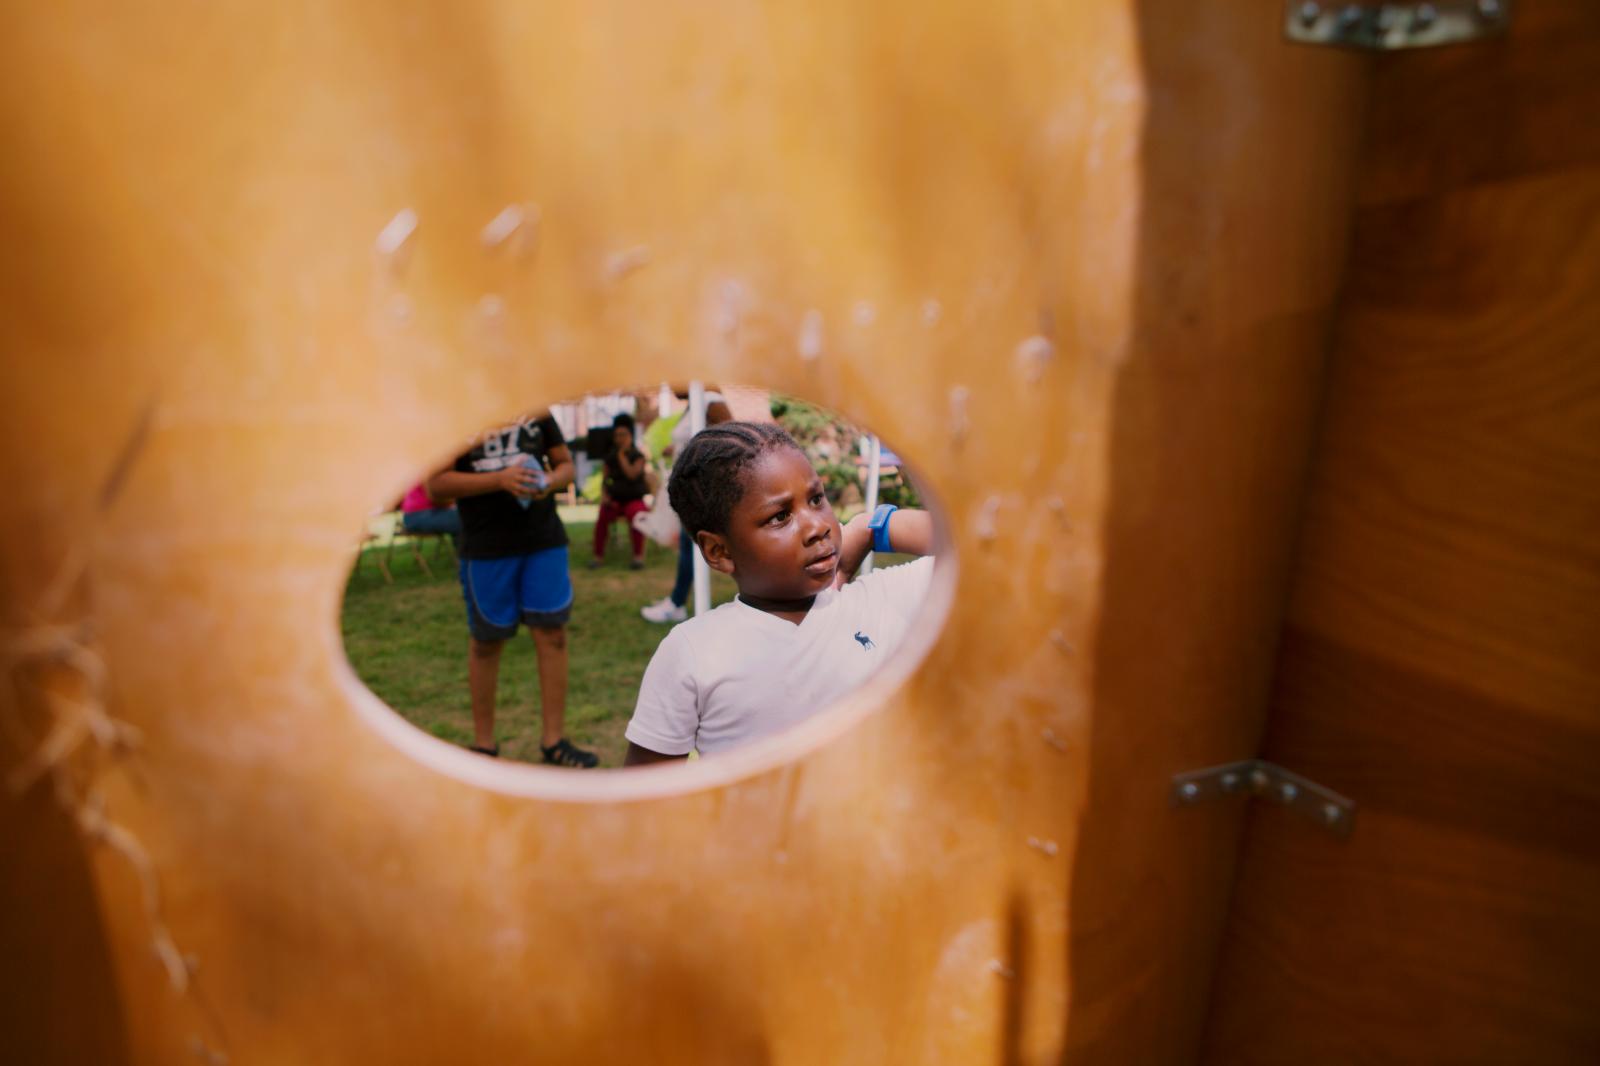 Isaac Walters, 5, plays Cornhole at the block party hosted by The Shiloh Baptist Church of Jamaica in Queens, New York.